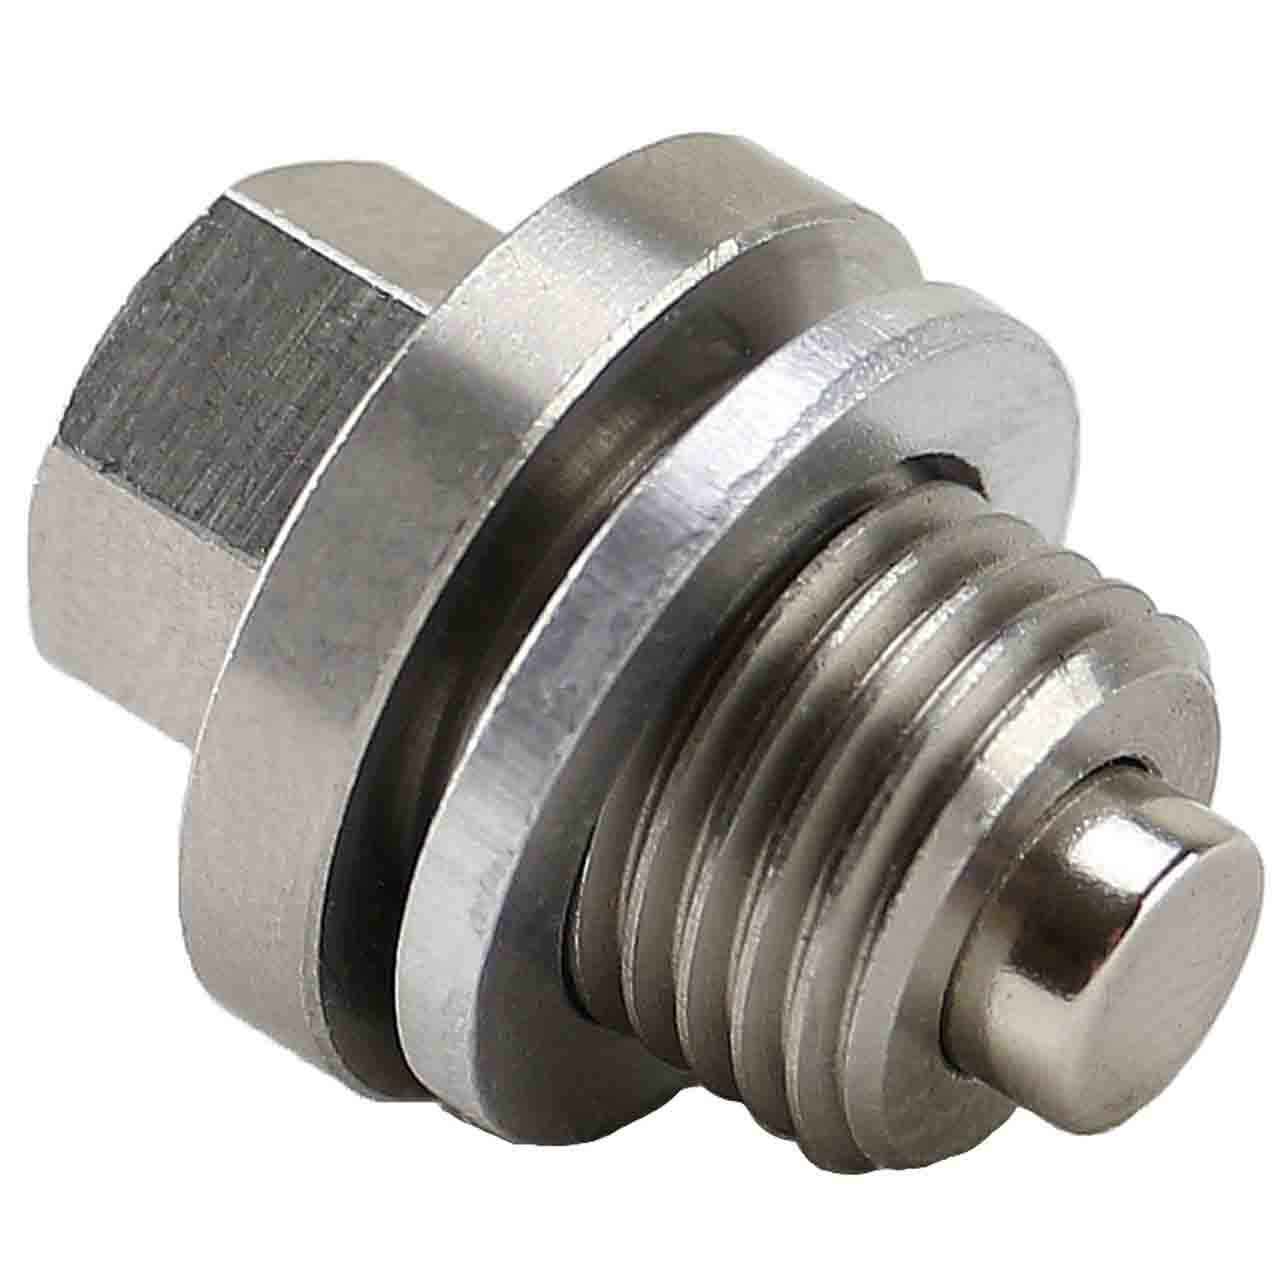 09247-12012 for Suzuki Motorcycle  - Stainless Steel Magnetic Oil Drain Plug with Neodymium Magnet - Made In USA